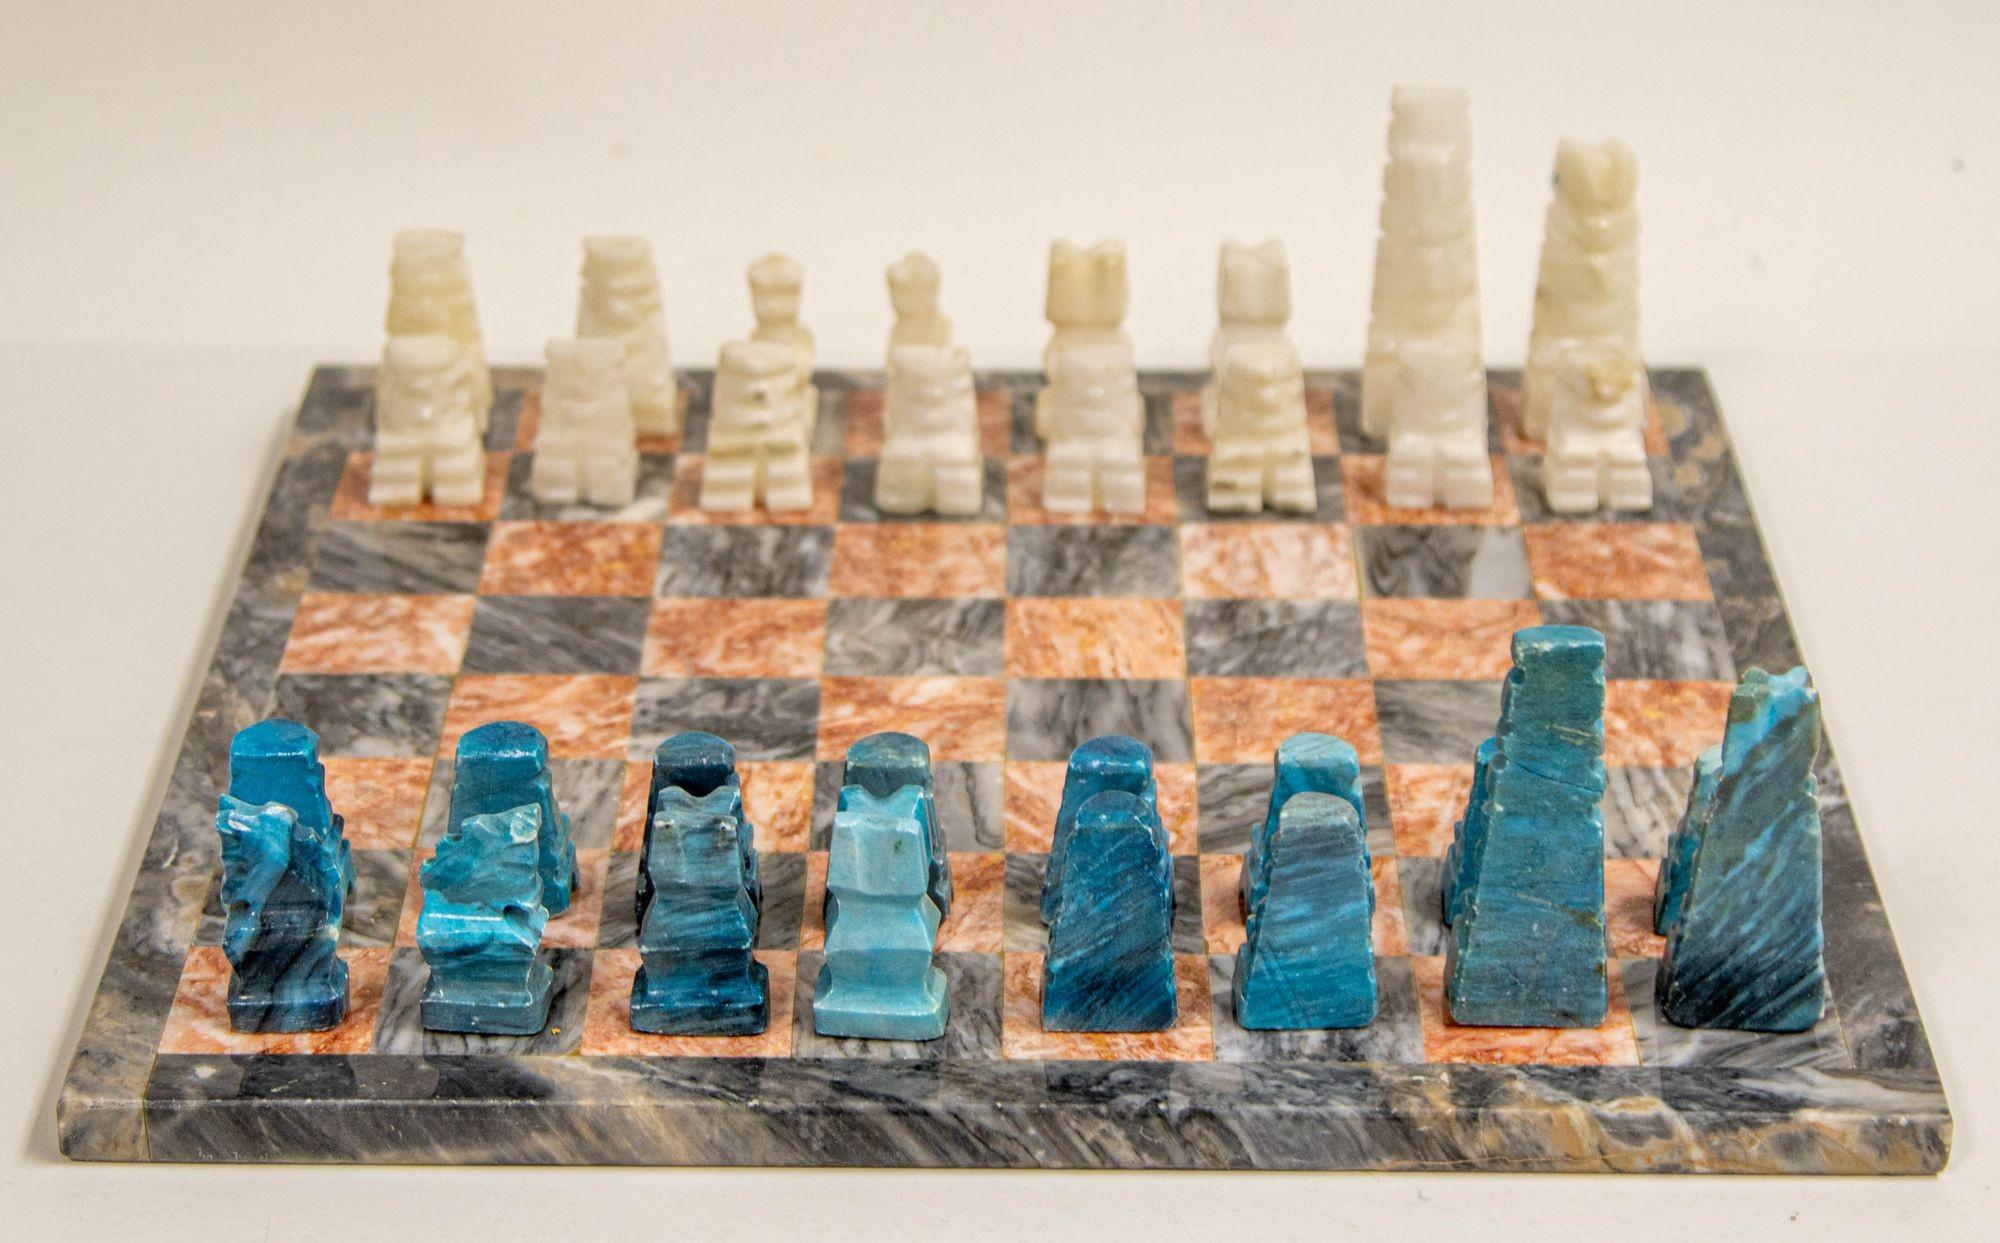 Vintage Marble Large Chess Set with hand carved Turquoise and White Onyx Pieces. 1950s.
Vintage mid 20th century Mexican stone marble chess set complete chess board in white and black and grey marble stone with elaborately hand carved turquoise and